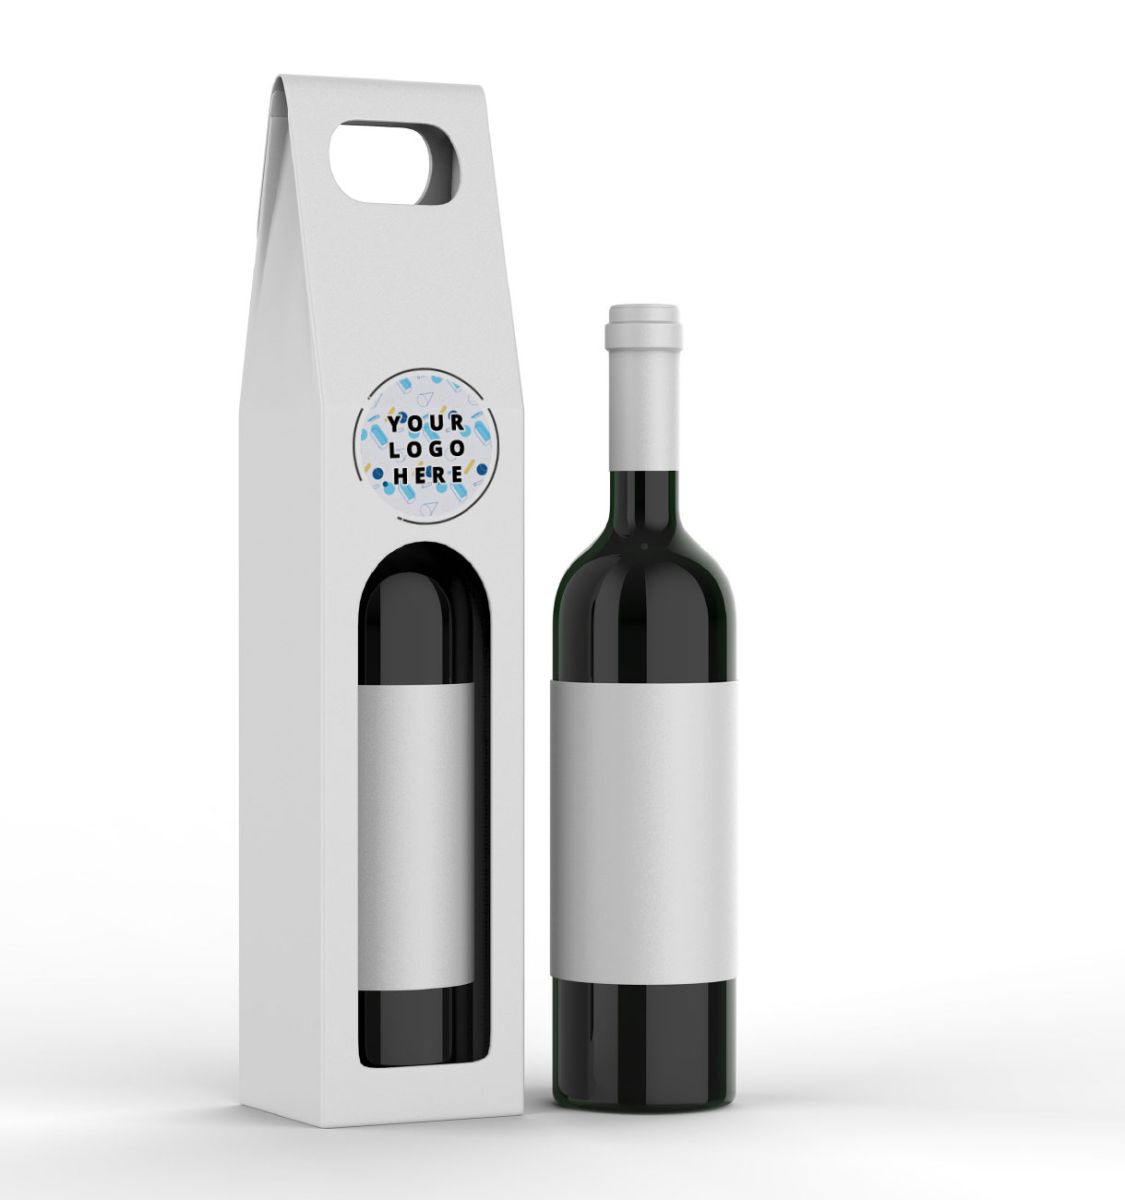 An image of a WINE PACKAGING box